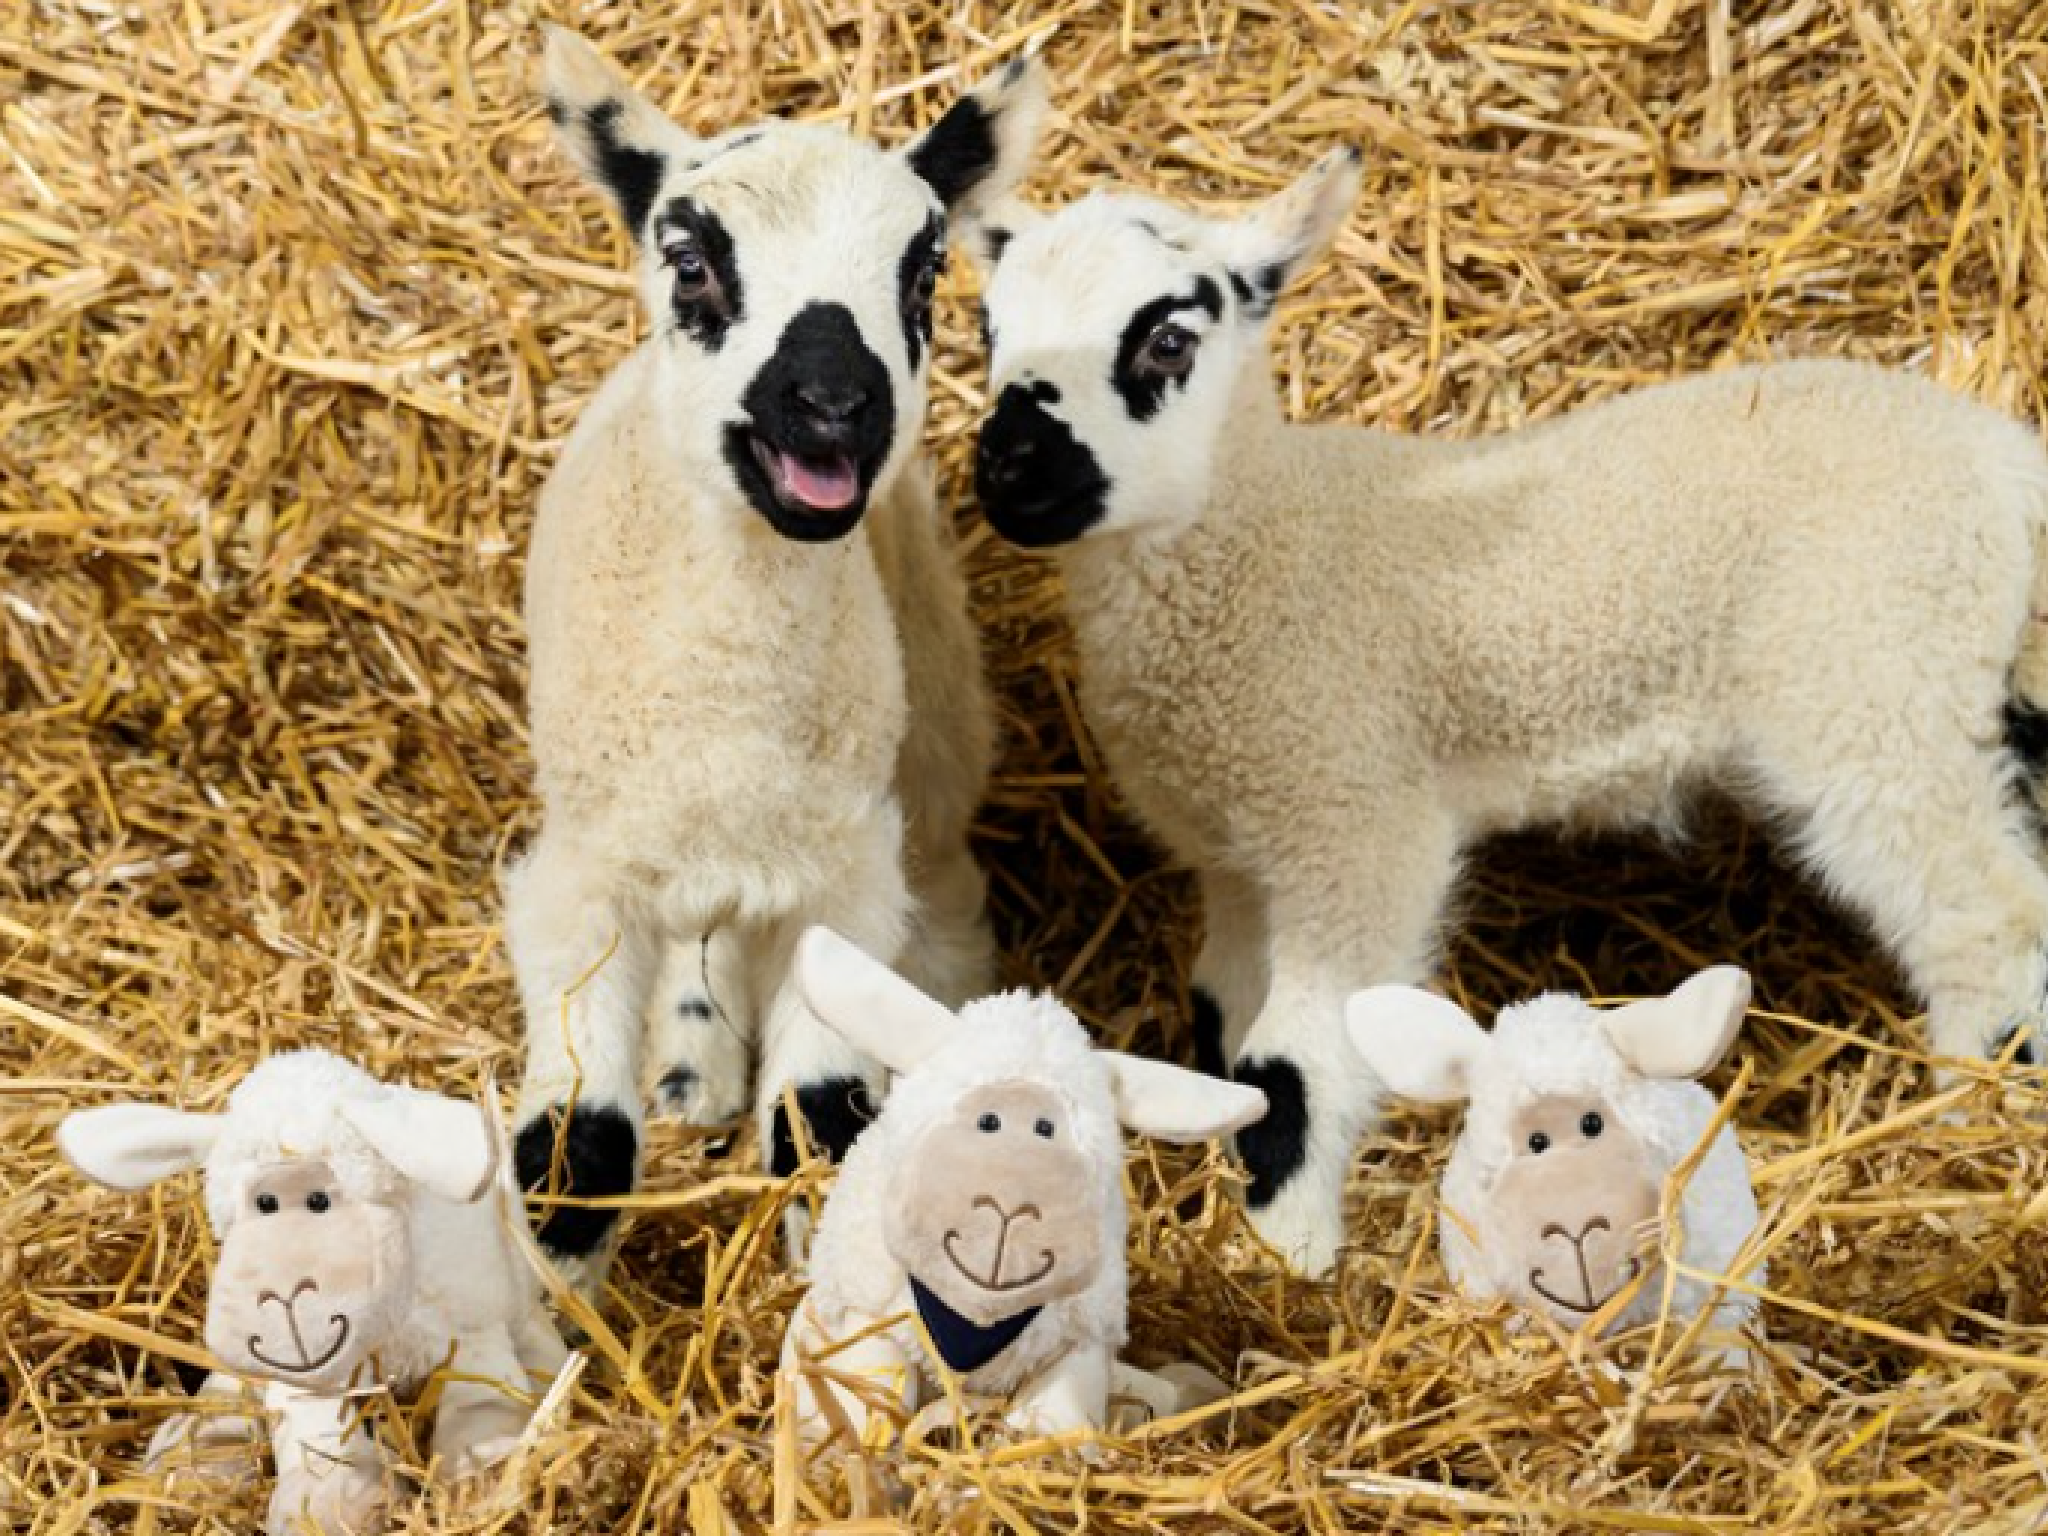 Find the cuddly lambs to win a prize